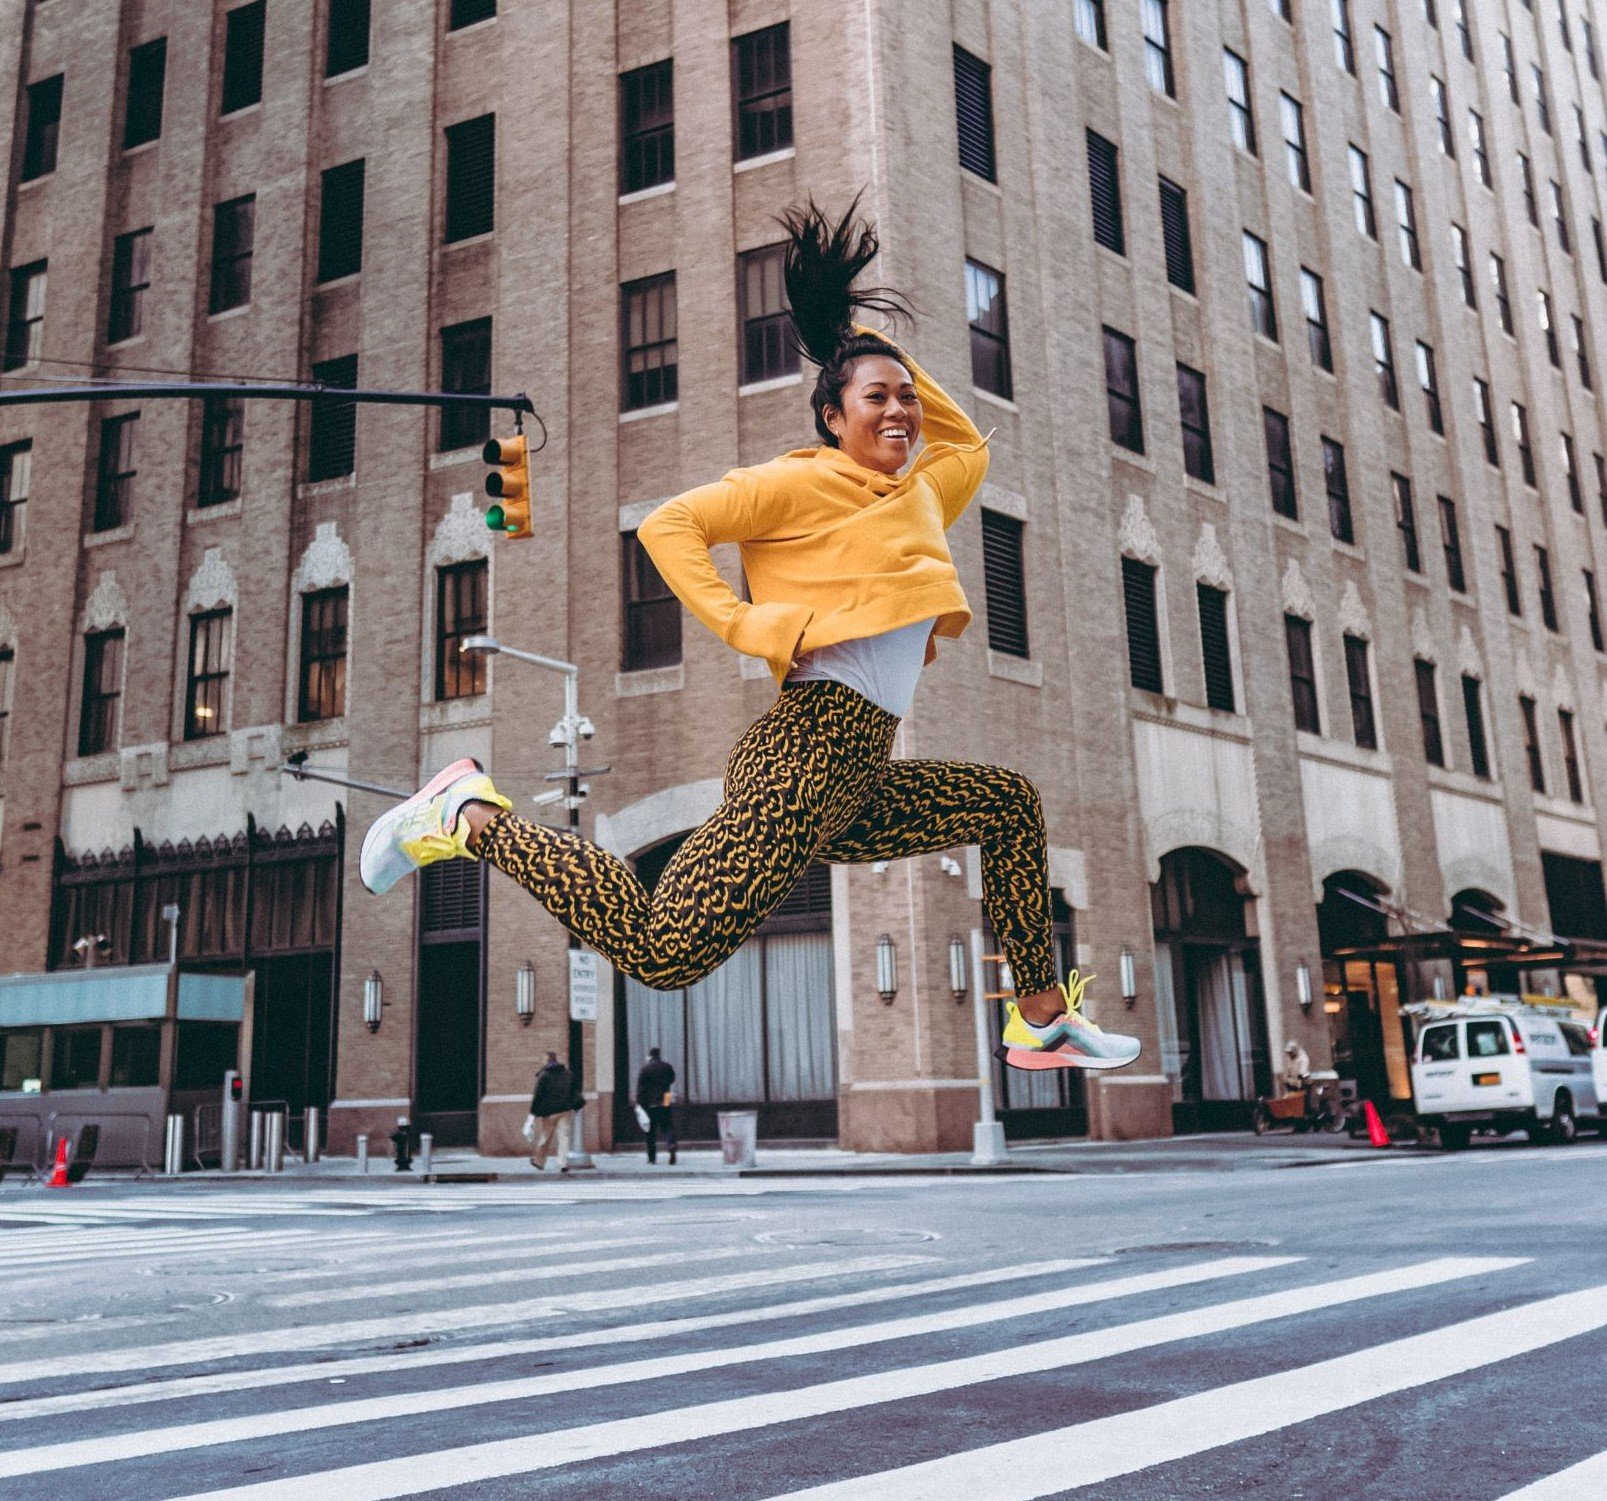 A dancer smiling in midair of a New York City street.